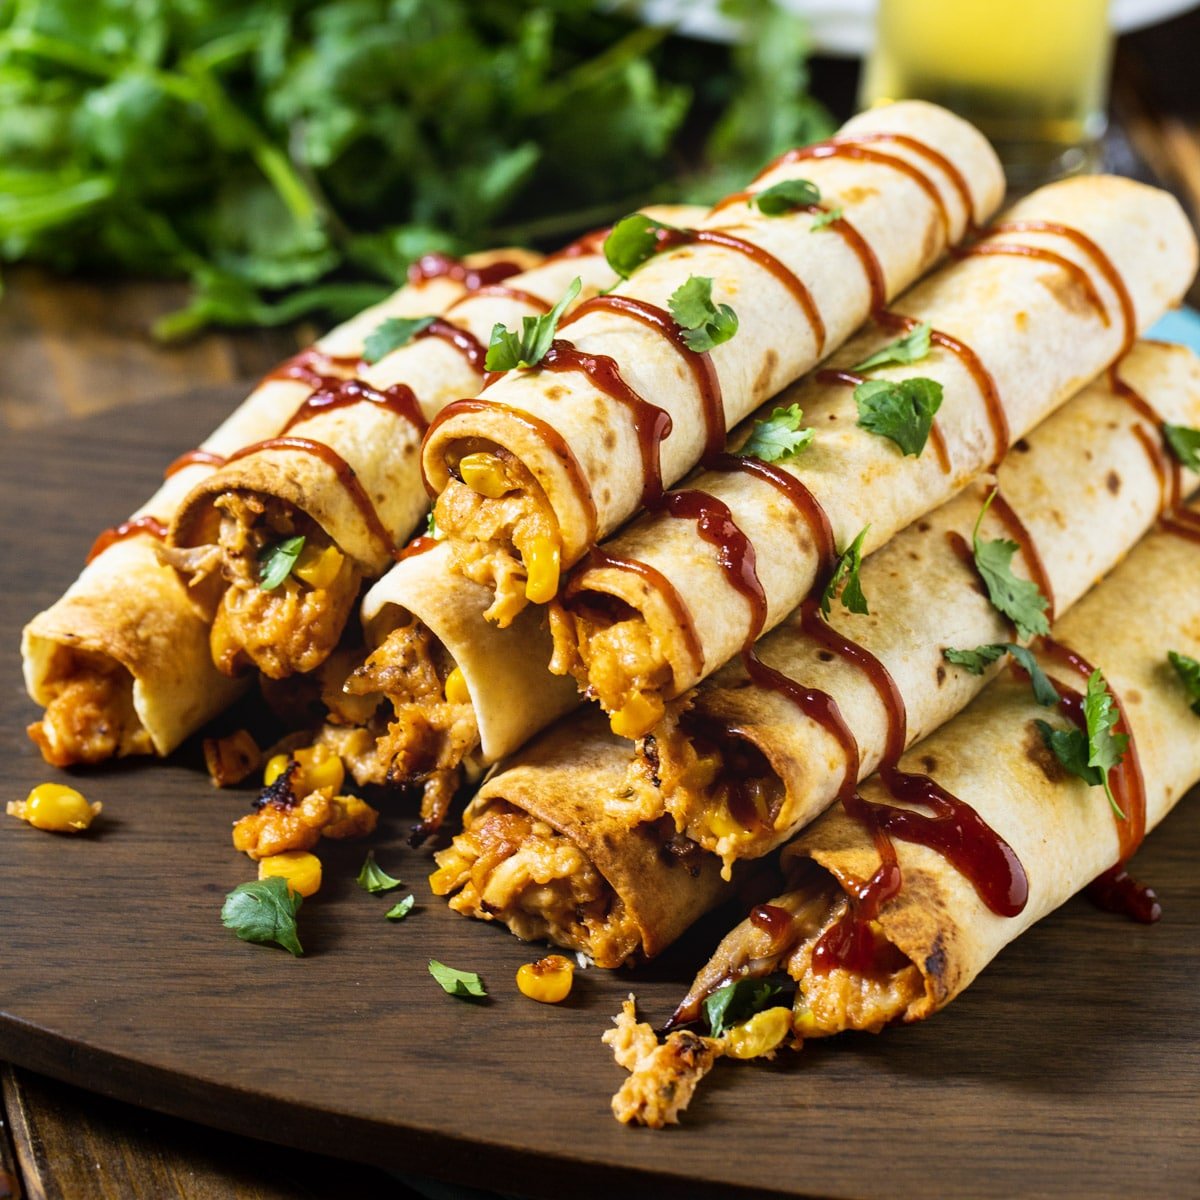 Pile of BBQ Chicken Taquitos on wooden board.